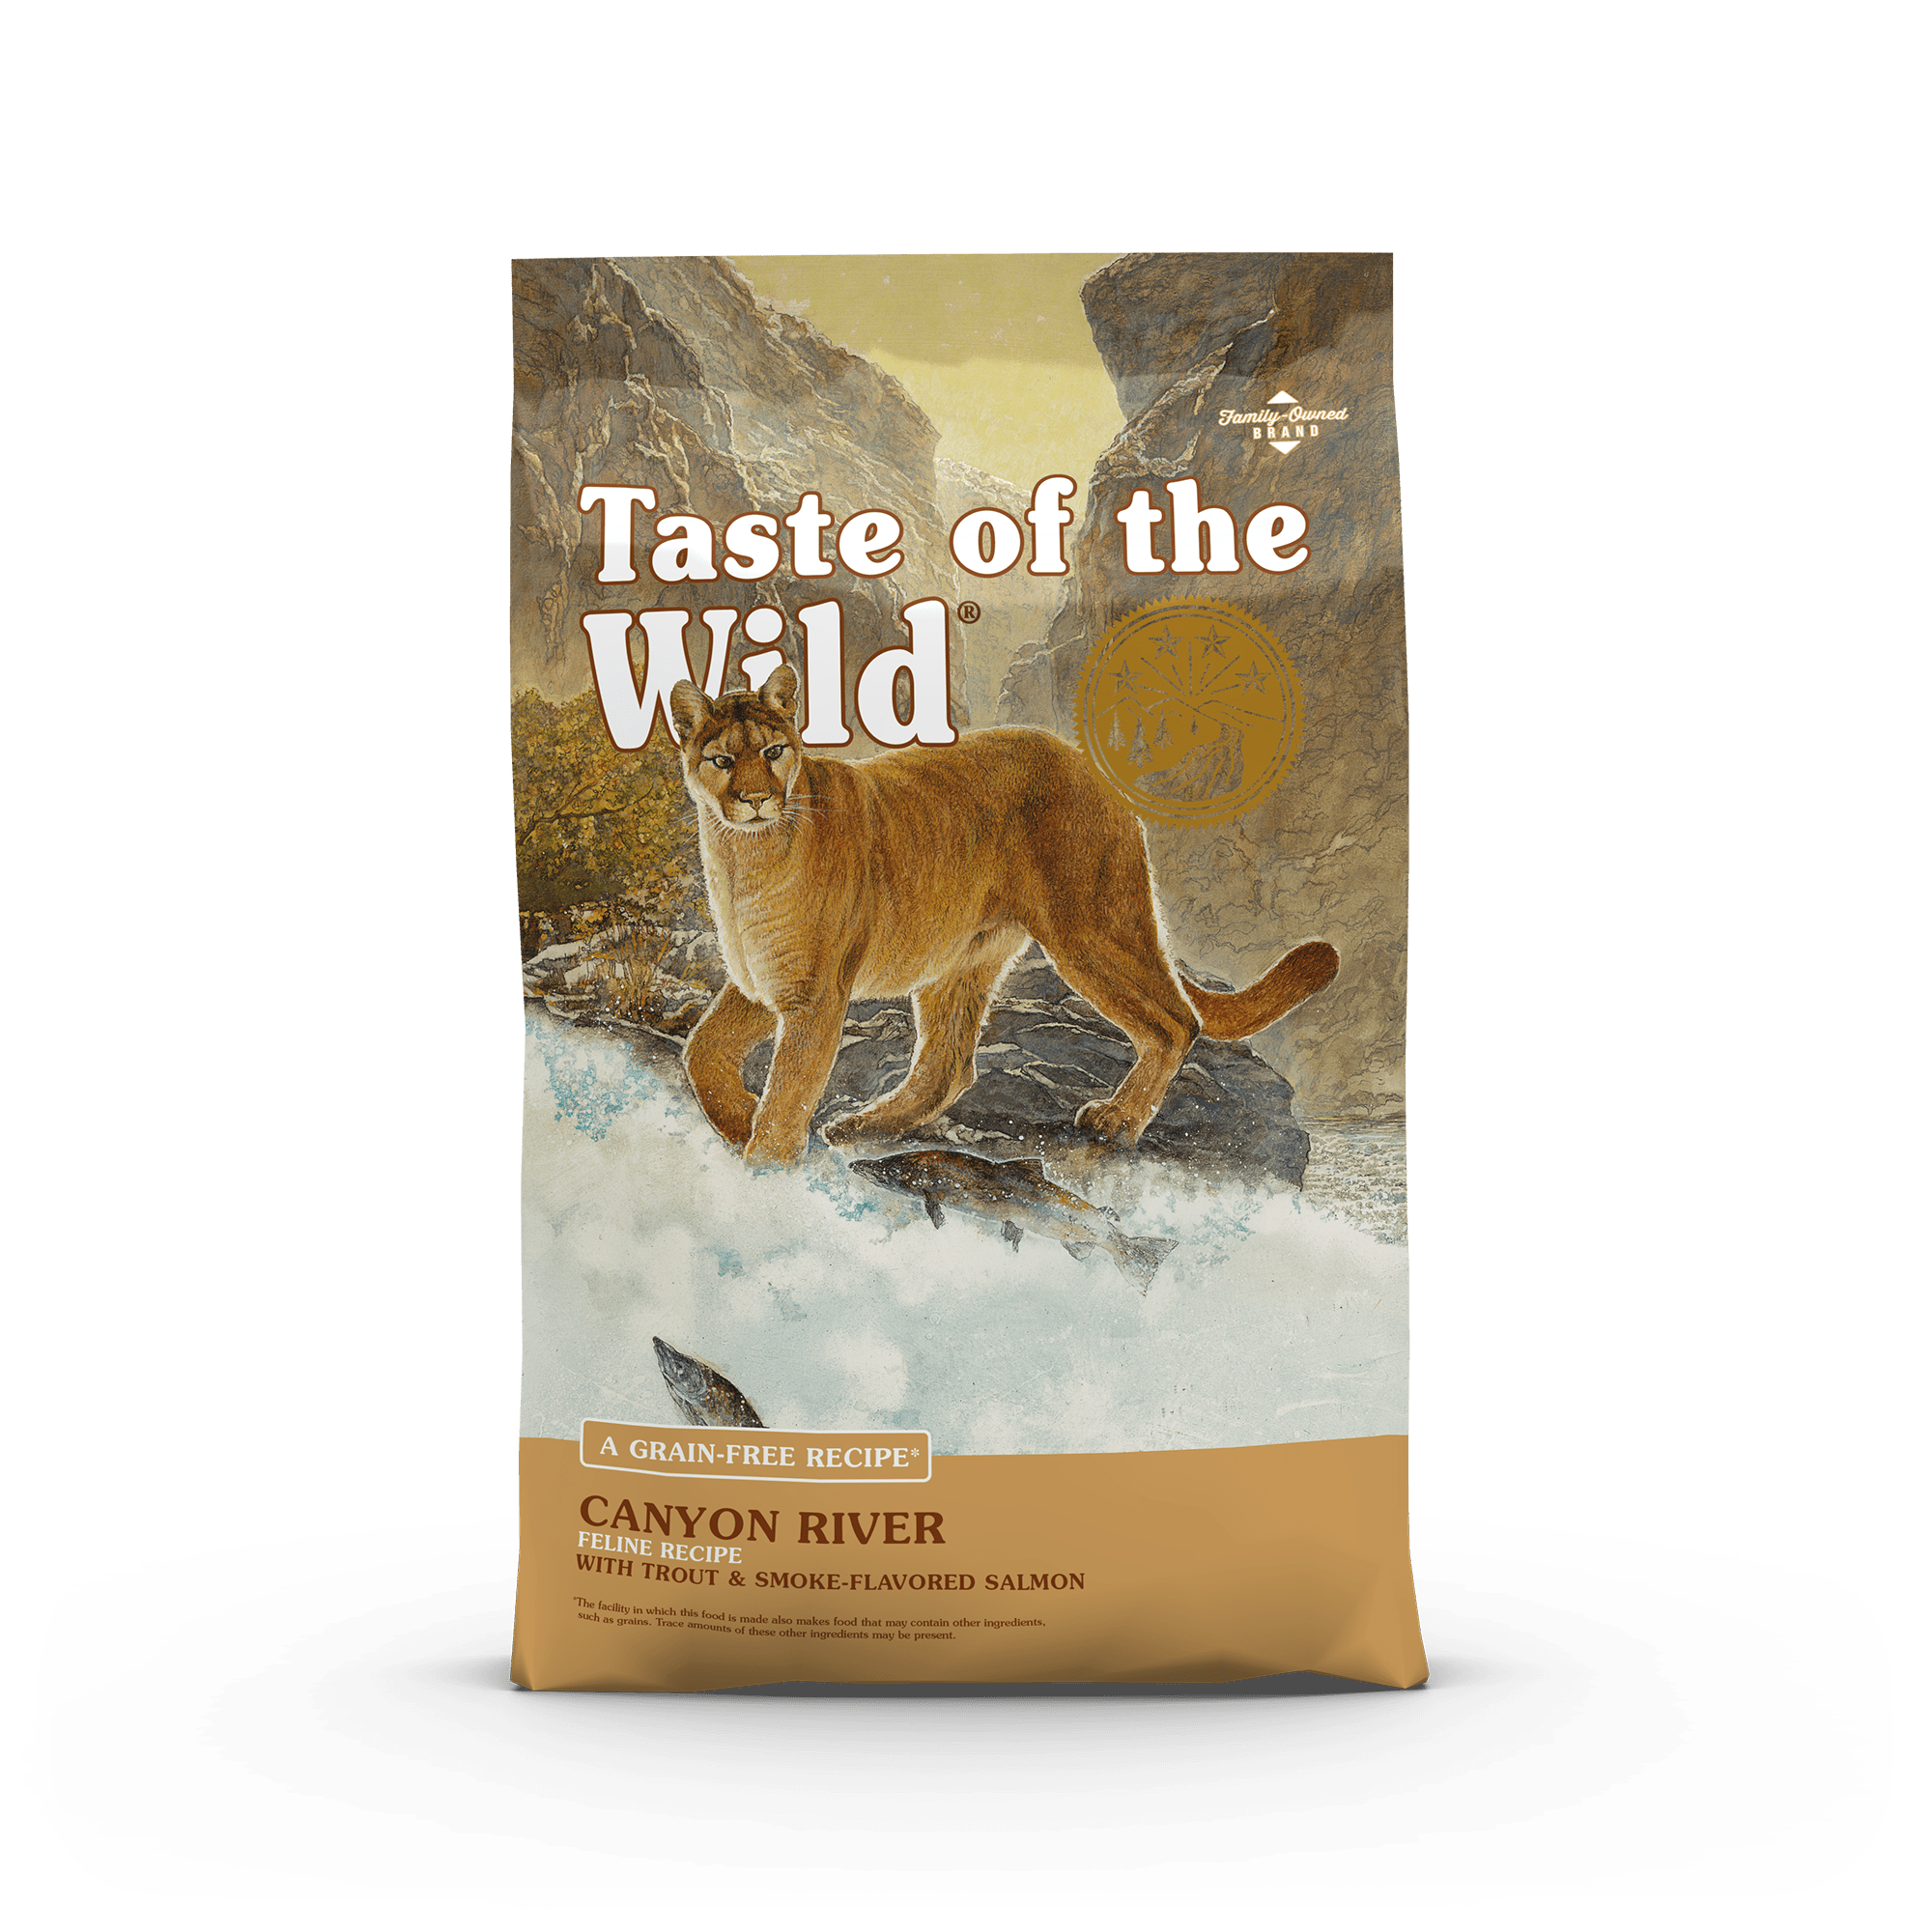 Taste of the Wild Grain-Free Canyon River Feline Recipe with Trout & Smoke-Flavored Salmon package